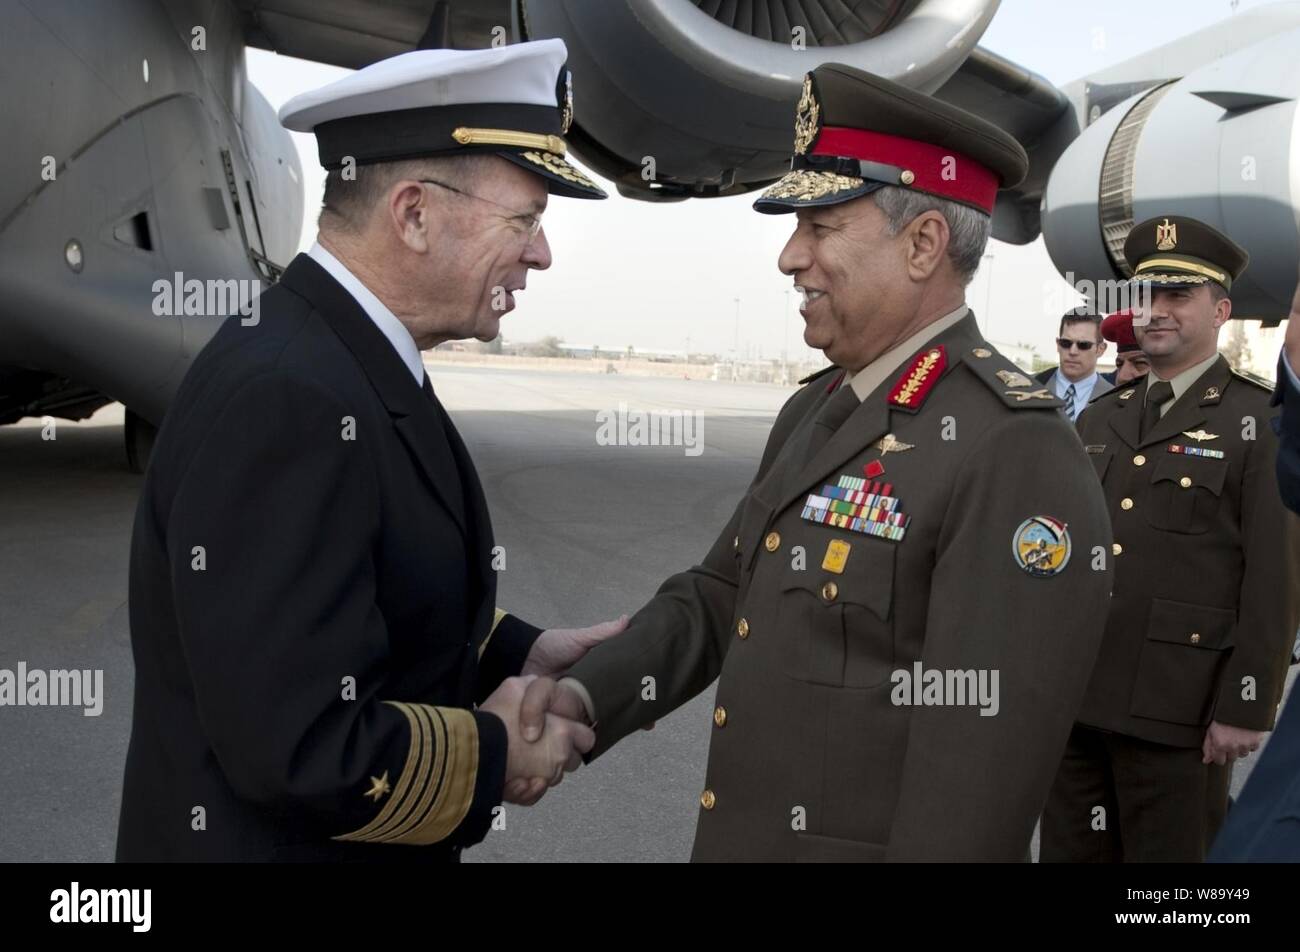 Chairman of the Joint Chiefs of Staff Adm. Mike Mullen, U.S. Navy, is greeted by Egyptian Maj. Gen. Hassan Roweny after his arrival in Cairo, Egypt, on Feb. 13, 2010.  Mullen is on a weeklong tour of the region visiting with key partners and allies. Stock Photo